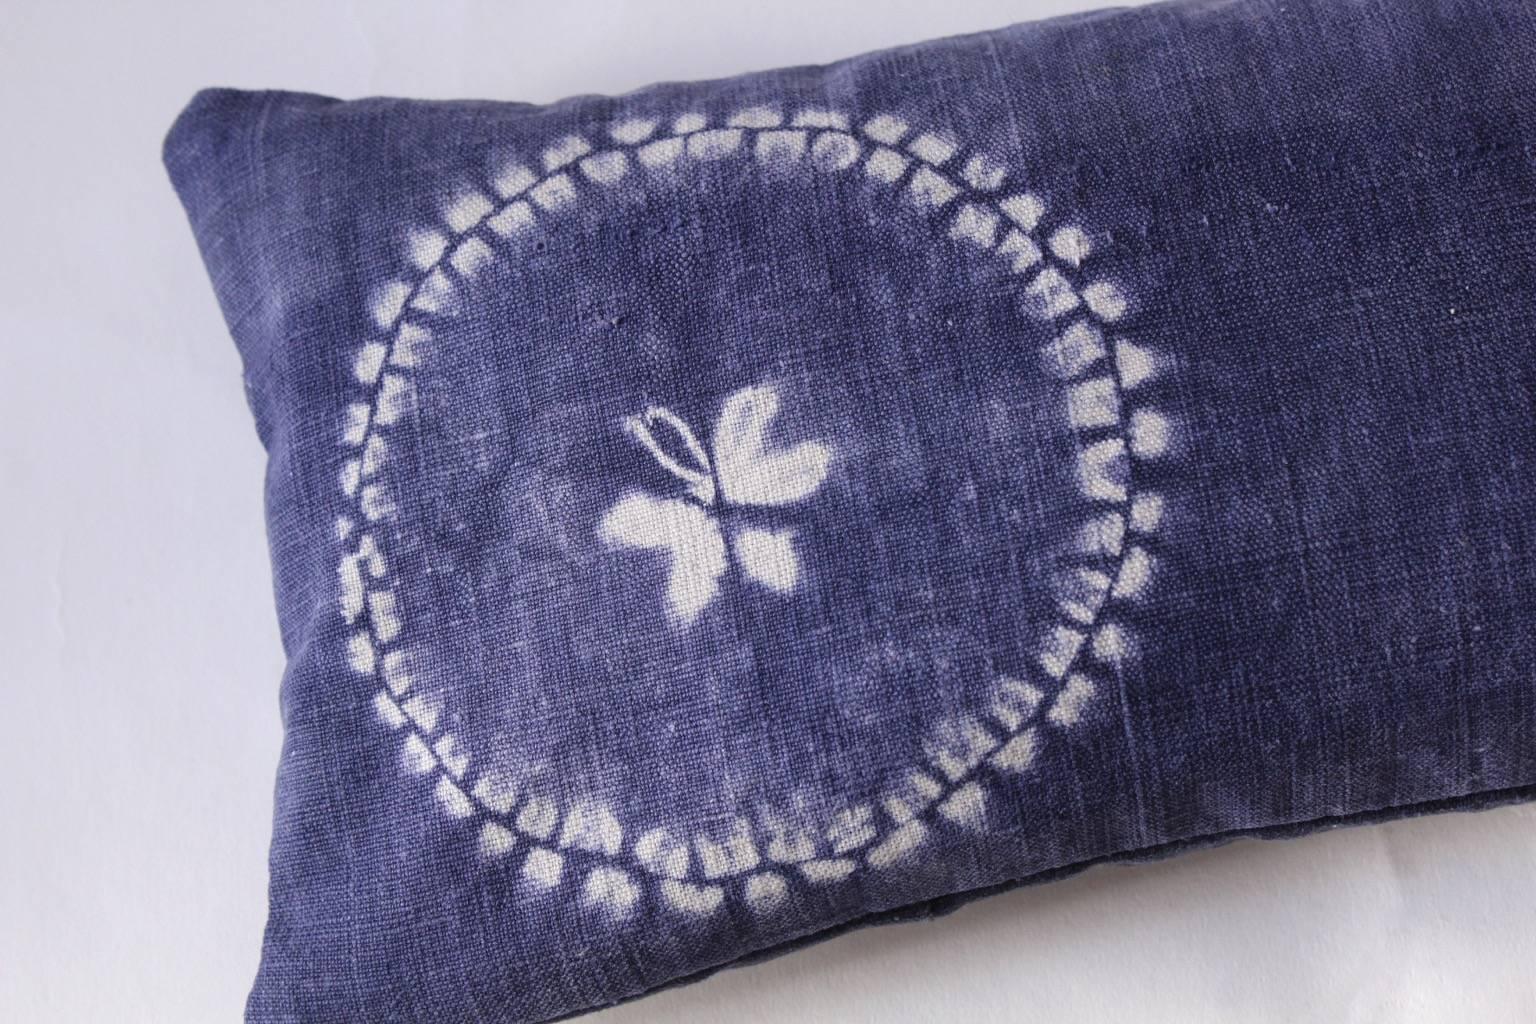 Antique, circa 1920. Cotton futon cover resist dye indigo, Hebei province China.
Spirals and butterfly. Filled with organic Buckwheat Hulls and scented with Santa Maria Novella PotPourri. 

Vintage cotton indigo on reverse, see image.
Filled